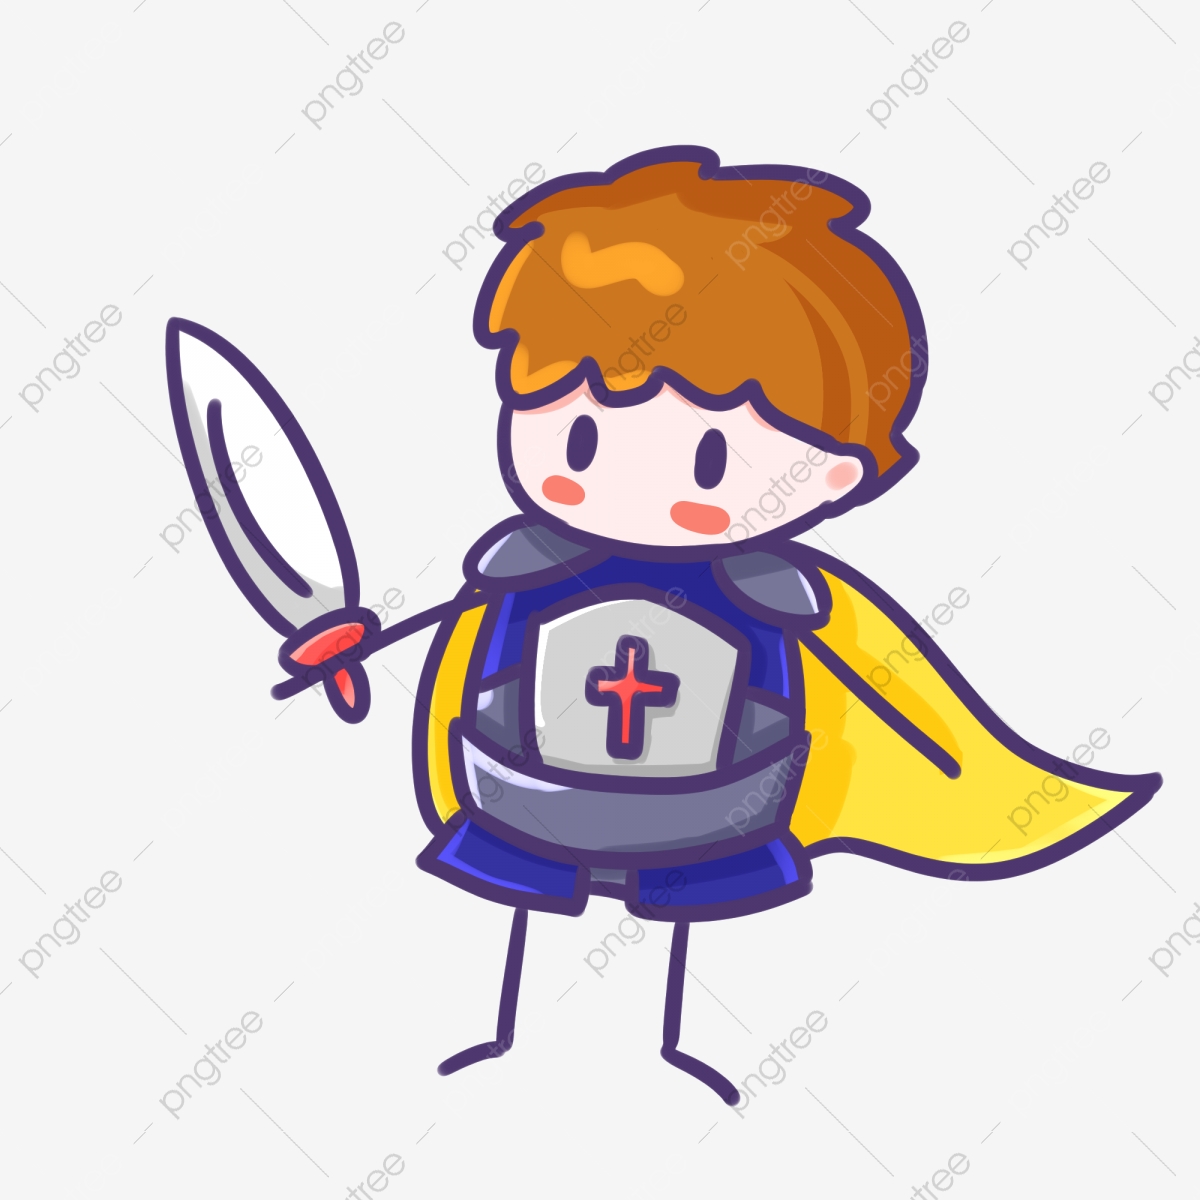 West middle knight fairy. Fairytale clipart dark ages